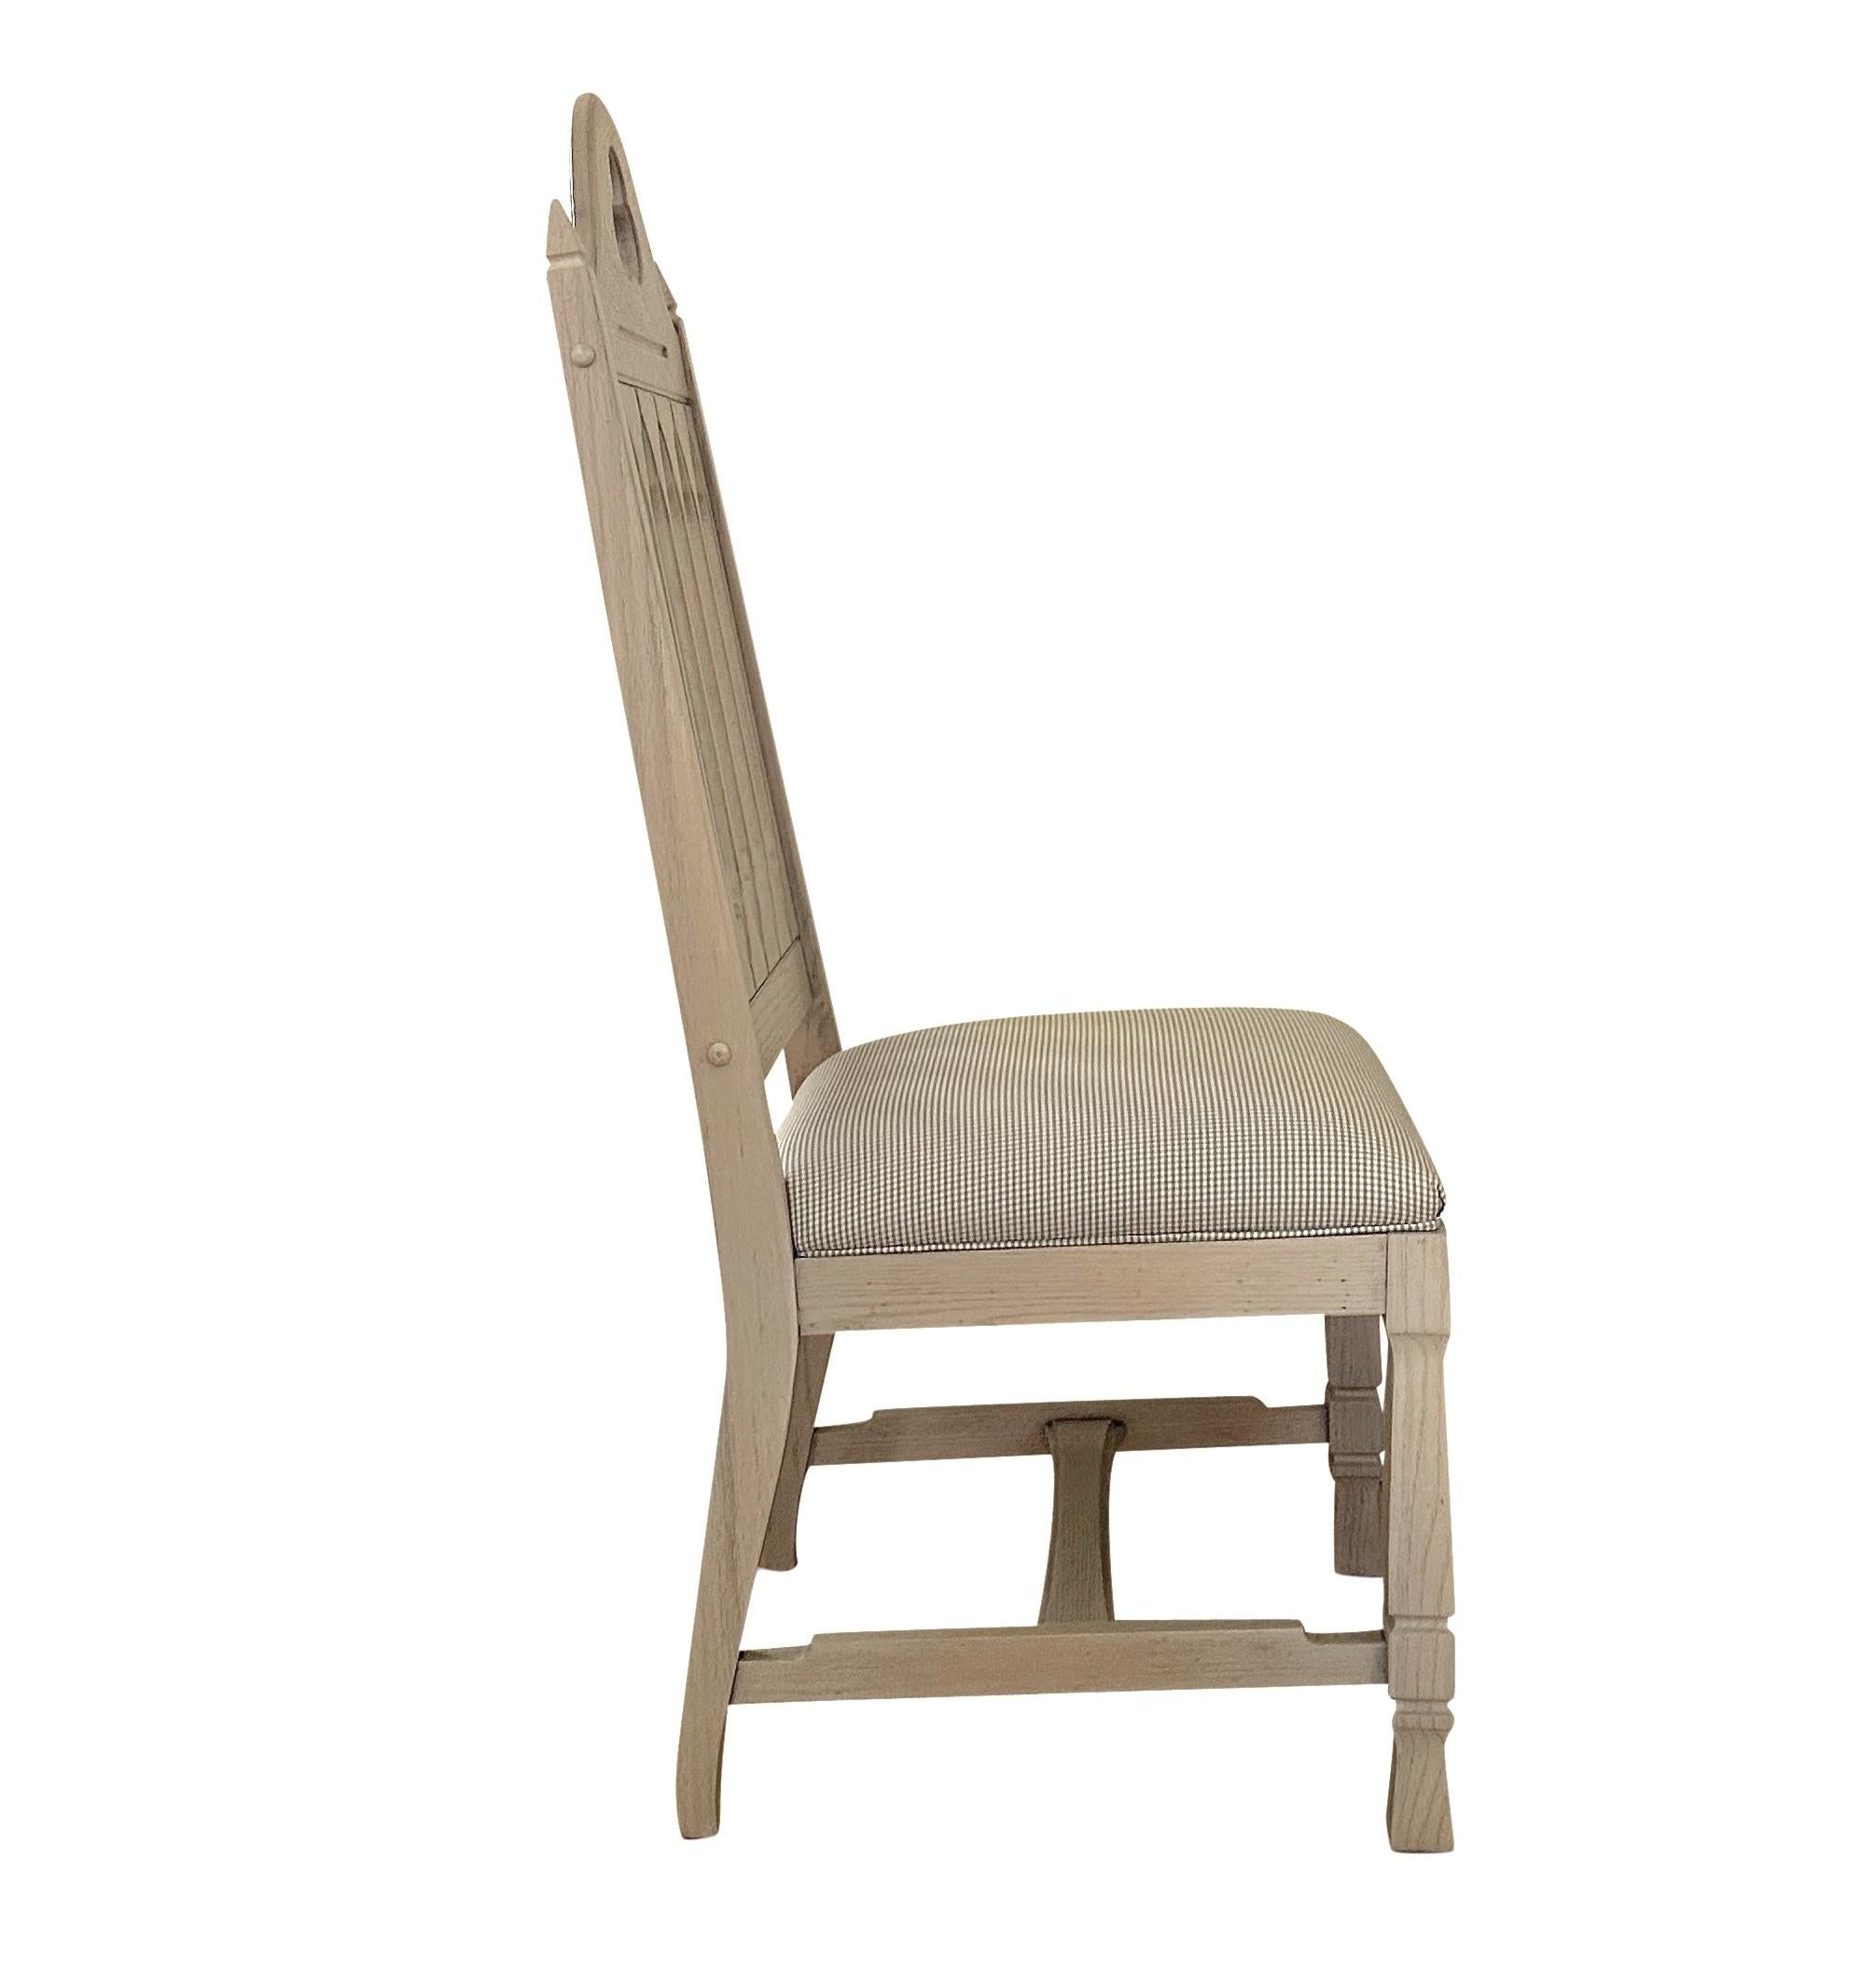 A set of six (6) hand-carved antique gothic dining chairs, which have been newly refinished and reupholstered. A bleached finish is paired with Schumacher' Barnet Cotton Check-Nickel. The combination of finish and fabric effuses a freshness, adding